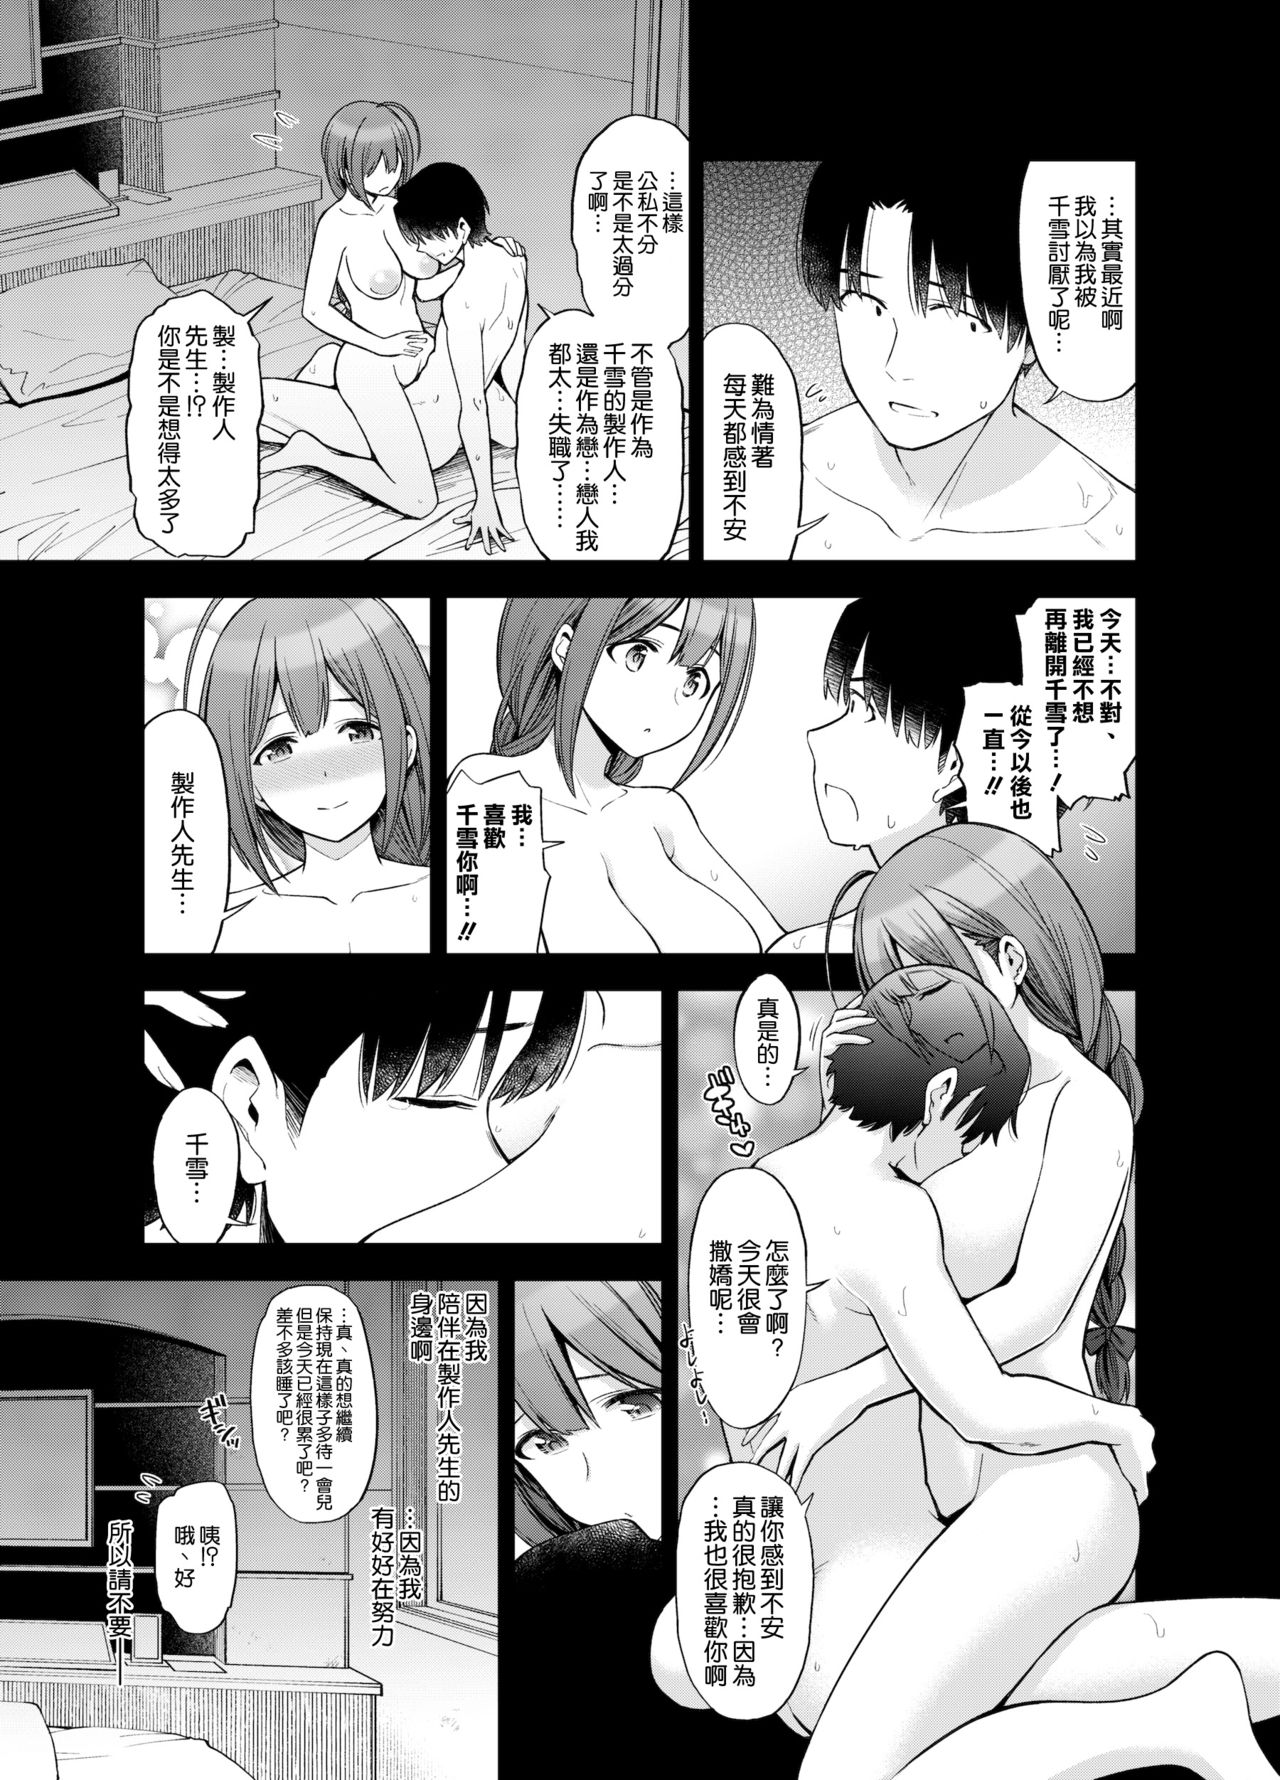 [SMUGGLER (Kazuwo Daisuke)] Late Night Blooming (THE iDOLM@STER: Shiny Colors) [Chinese] [空気系☆漢化] [Digital] page 11 full